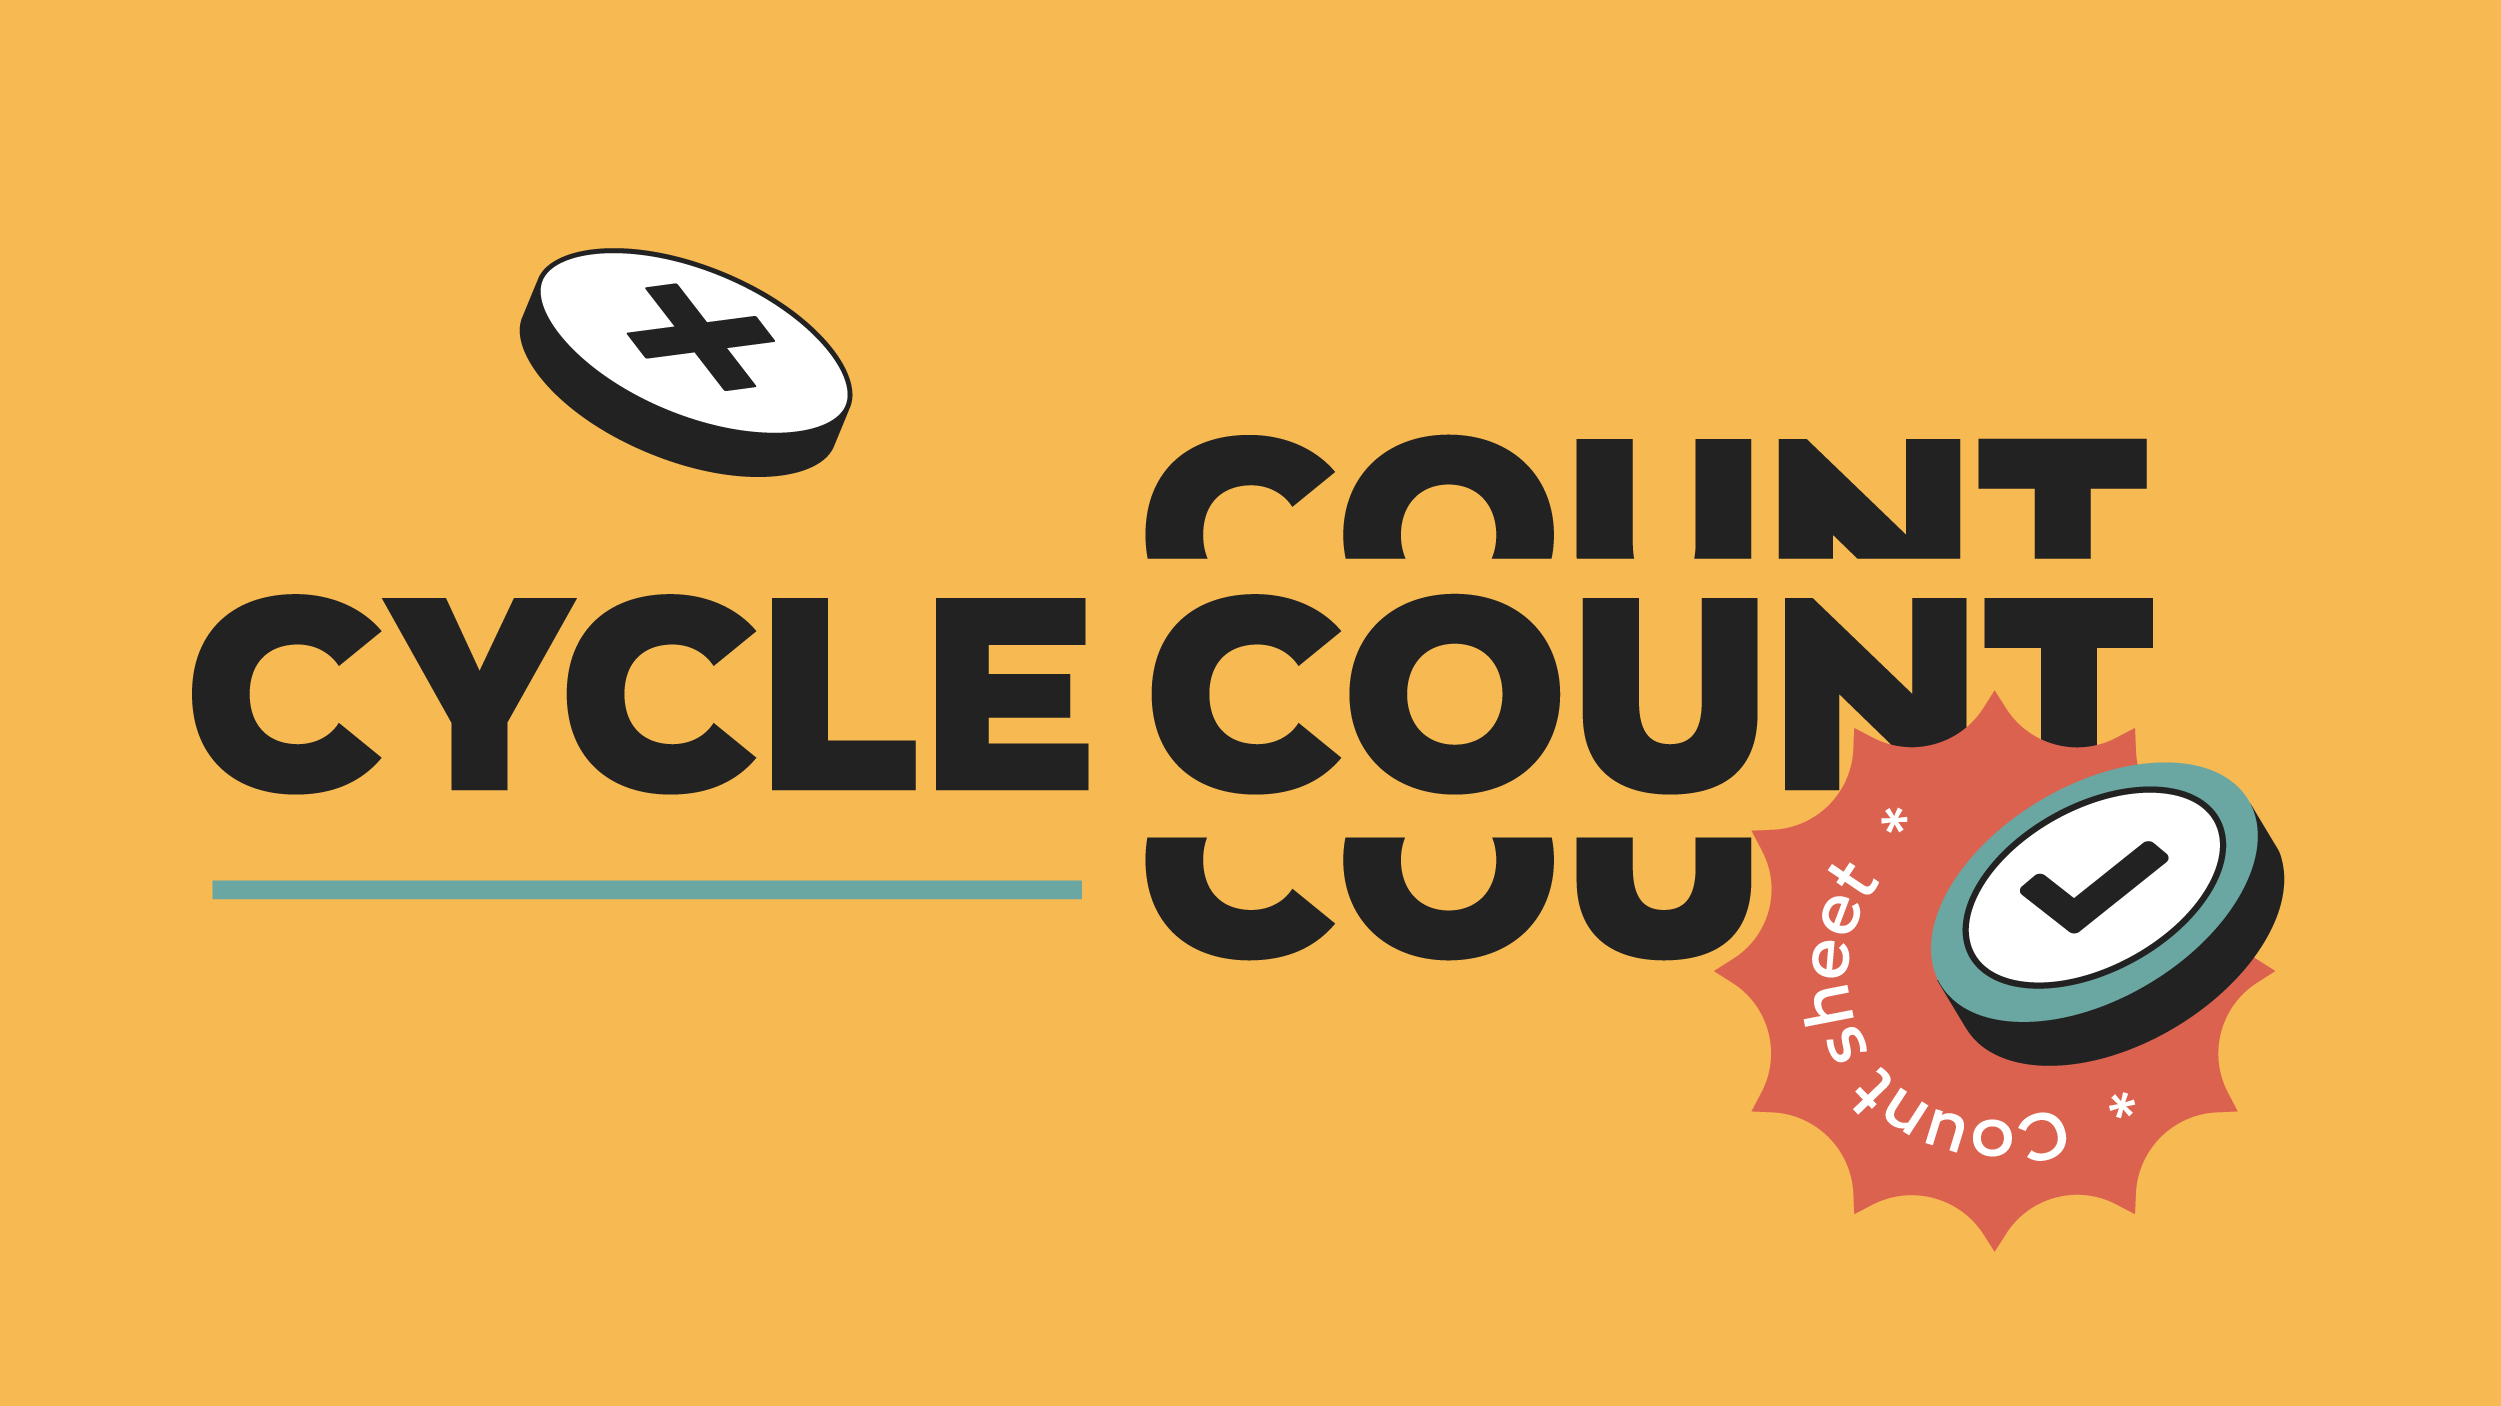 How to Run a Cycle Count